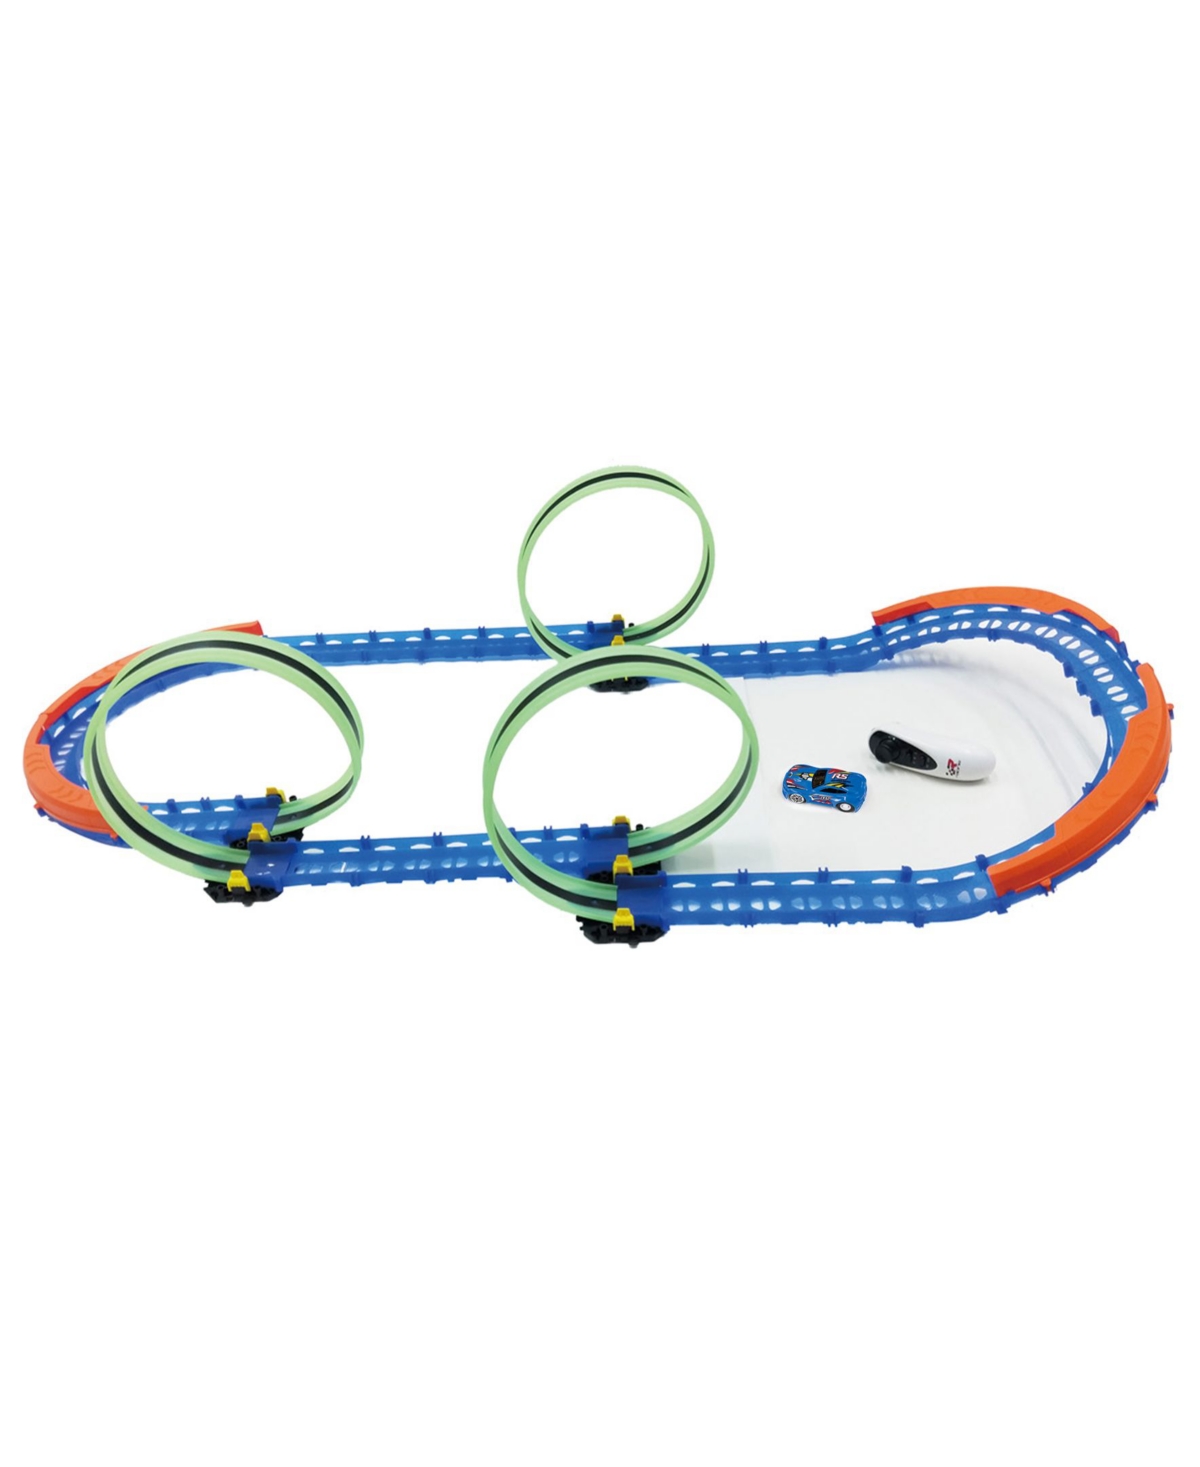 Jada Toys R/c Car And Track With Three Loops And Glow Trace Technology. In Multi